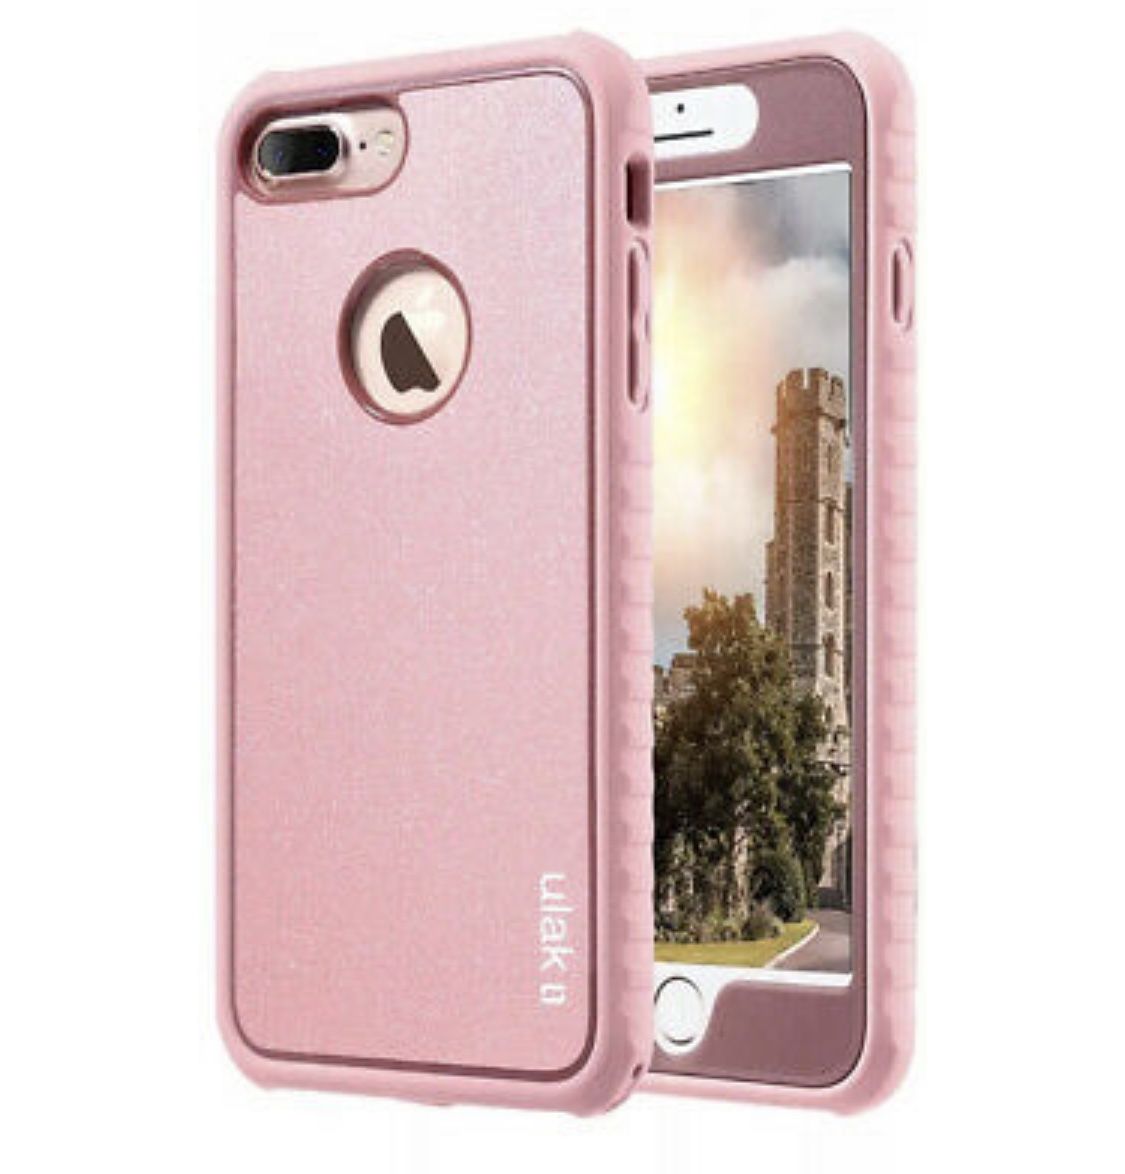 New In Box, iPhone 8 Plus, Pink Shockproof